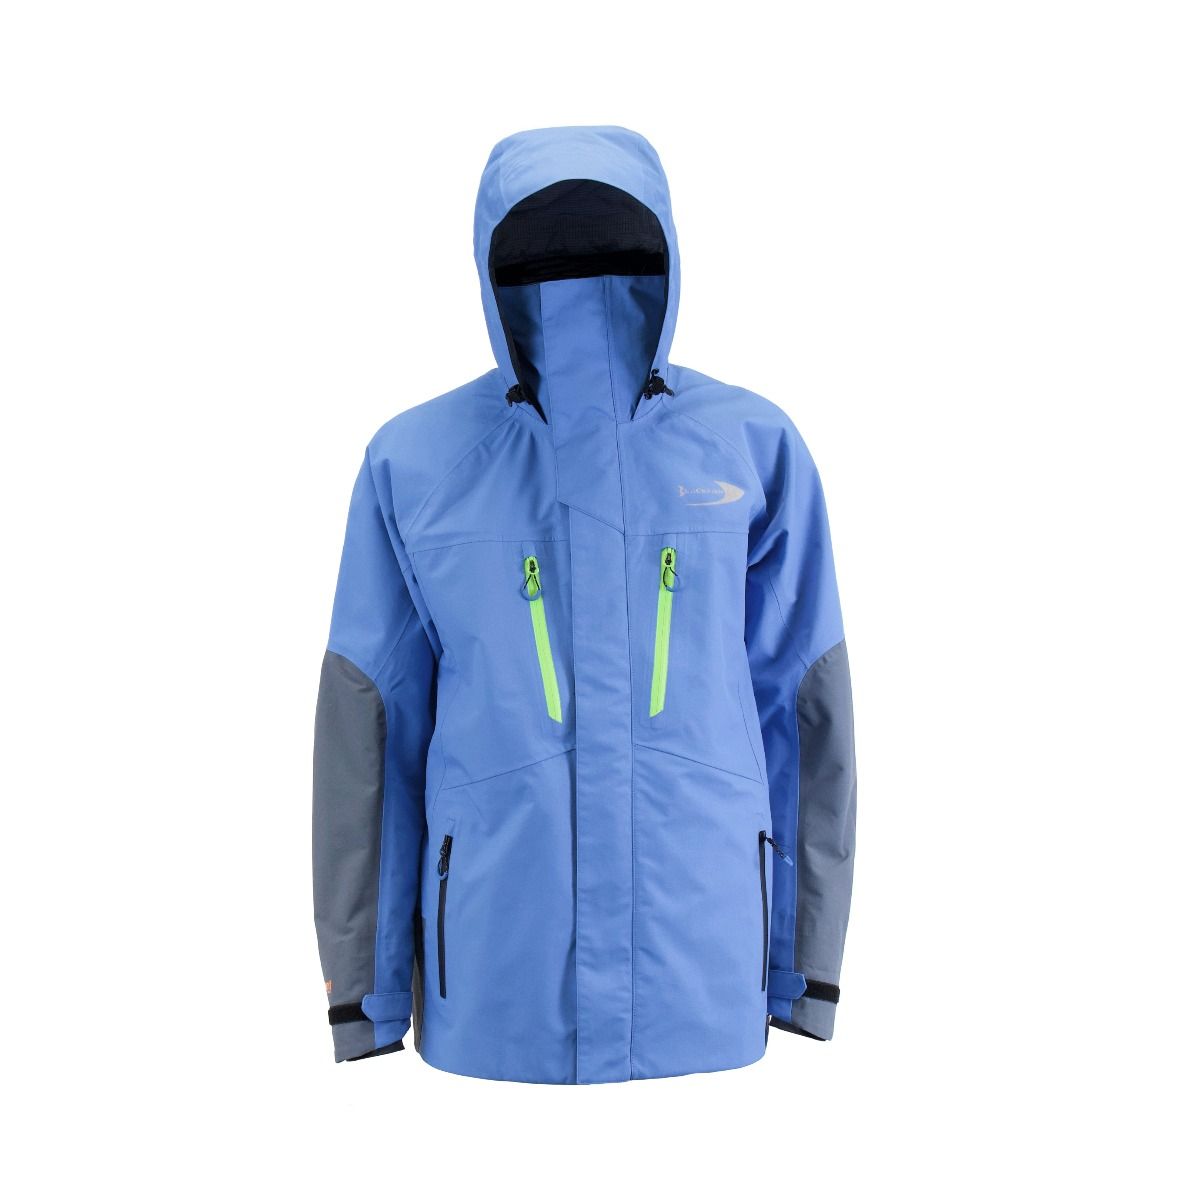 Blackfish Launches New Line of Rain Suits